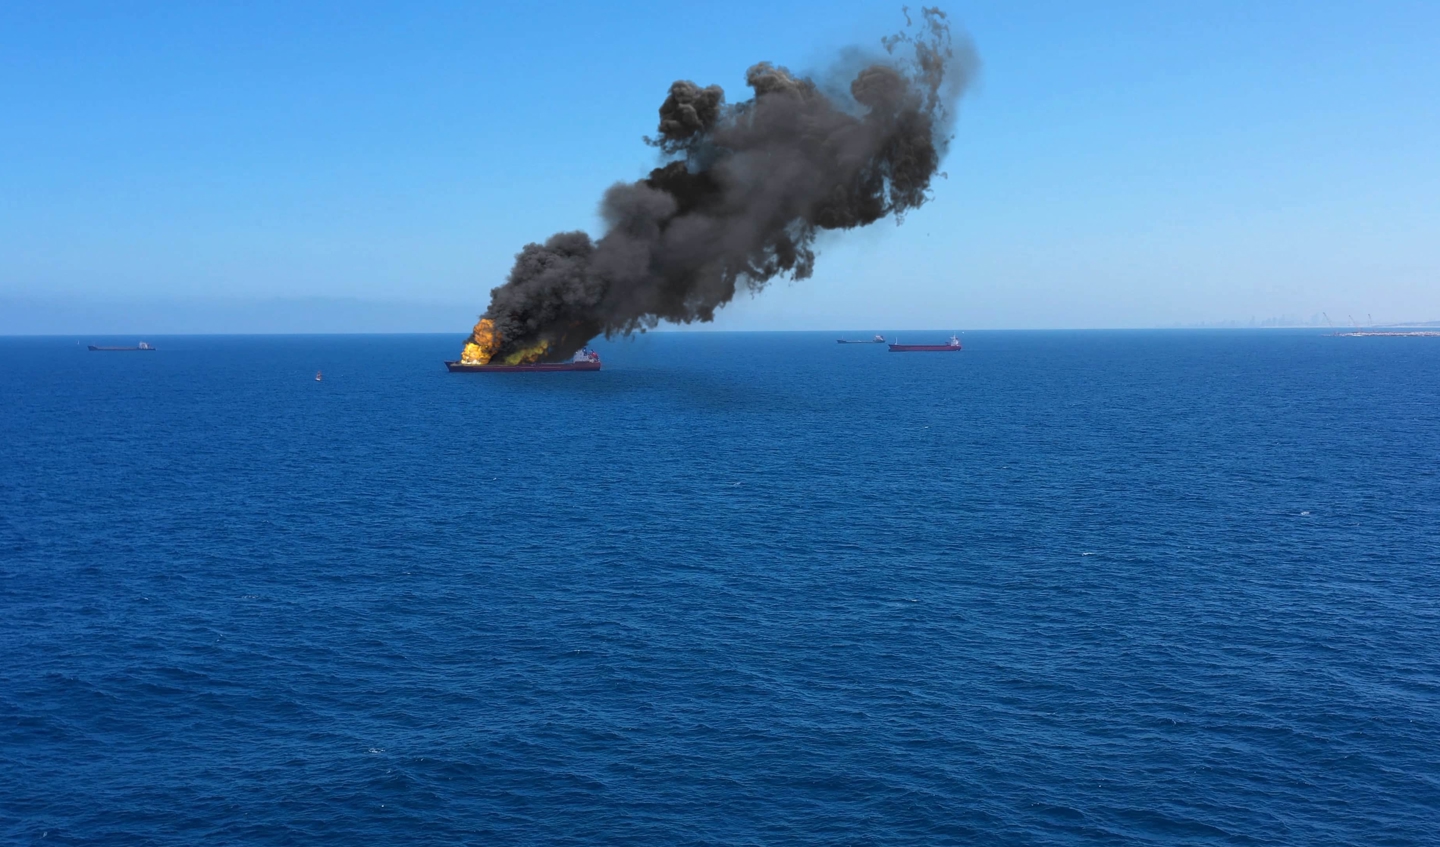 A cargo ship on fire out at sea.